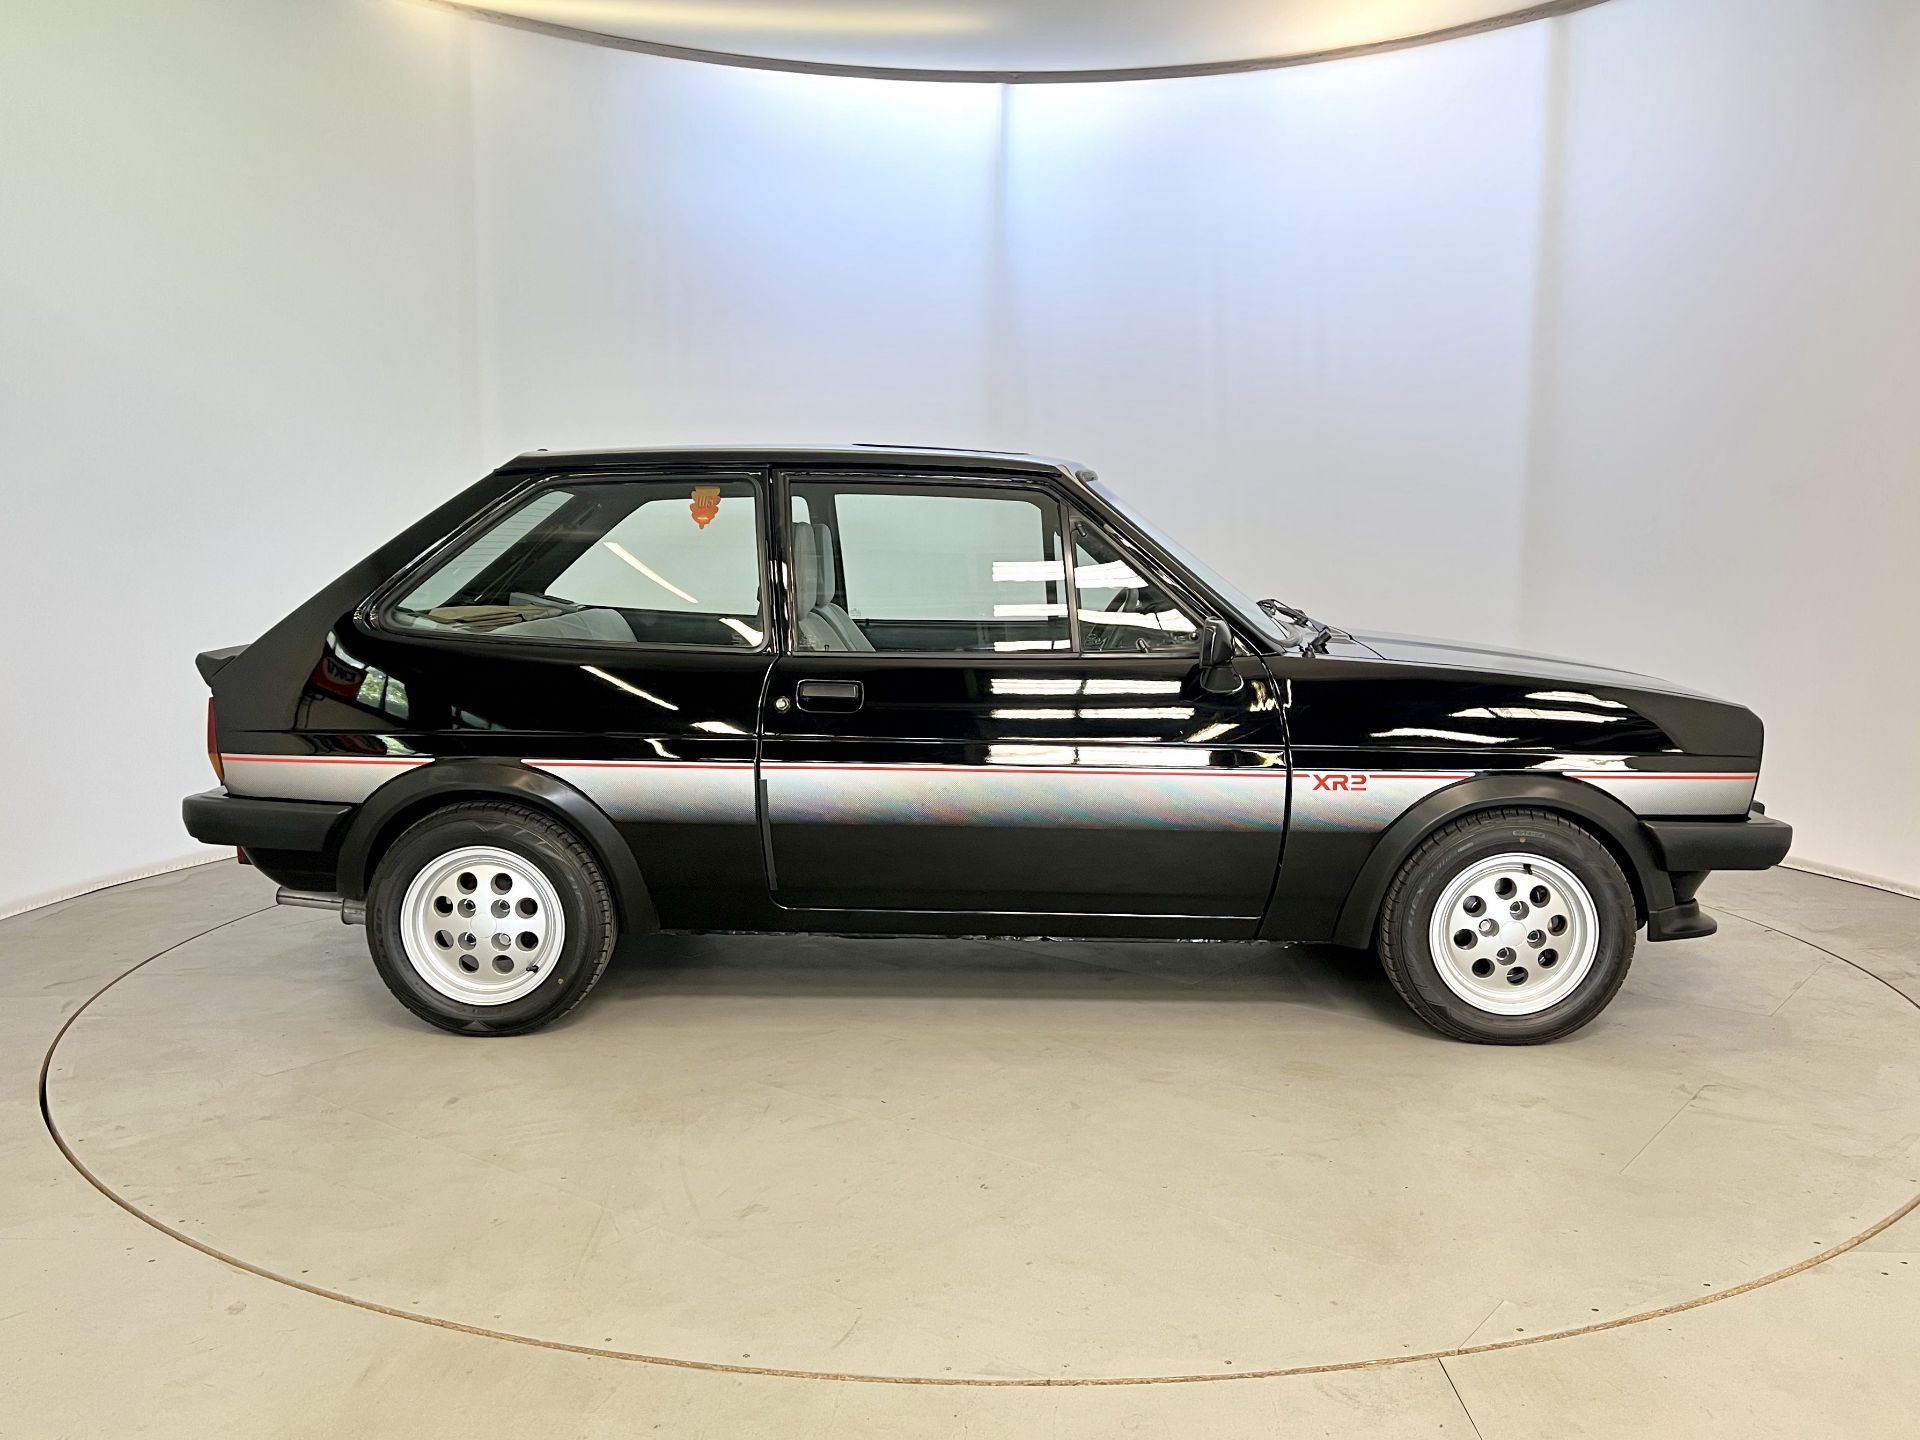 Ford Fiesta XR2 - Image 11 of 33